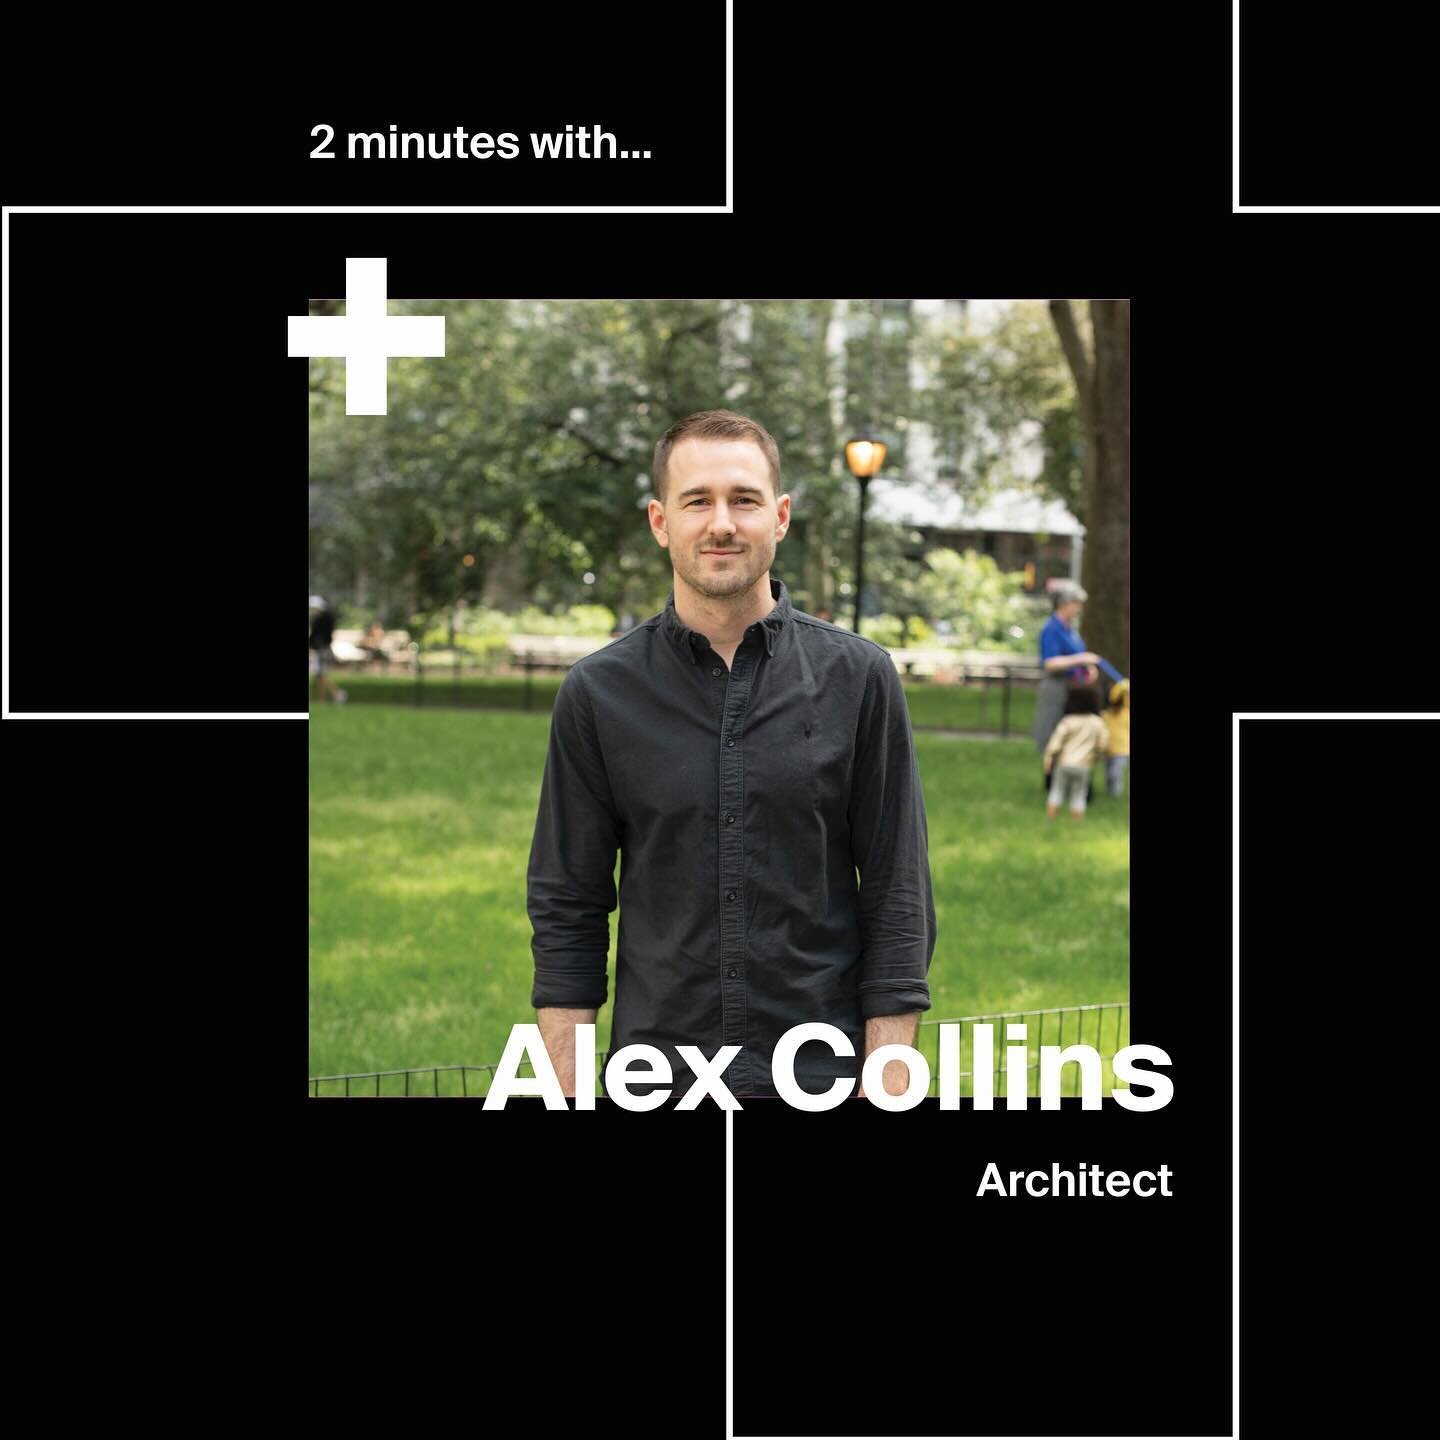 Last month, we introduced our &quot;2 minutes with...&quot; series, where we highlight and celebrate the A+I crew. We're excited to carry it forth this month with a feature of Alex Collins!

#aplusi #aplusipeople